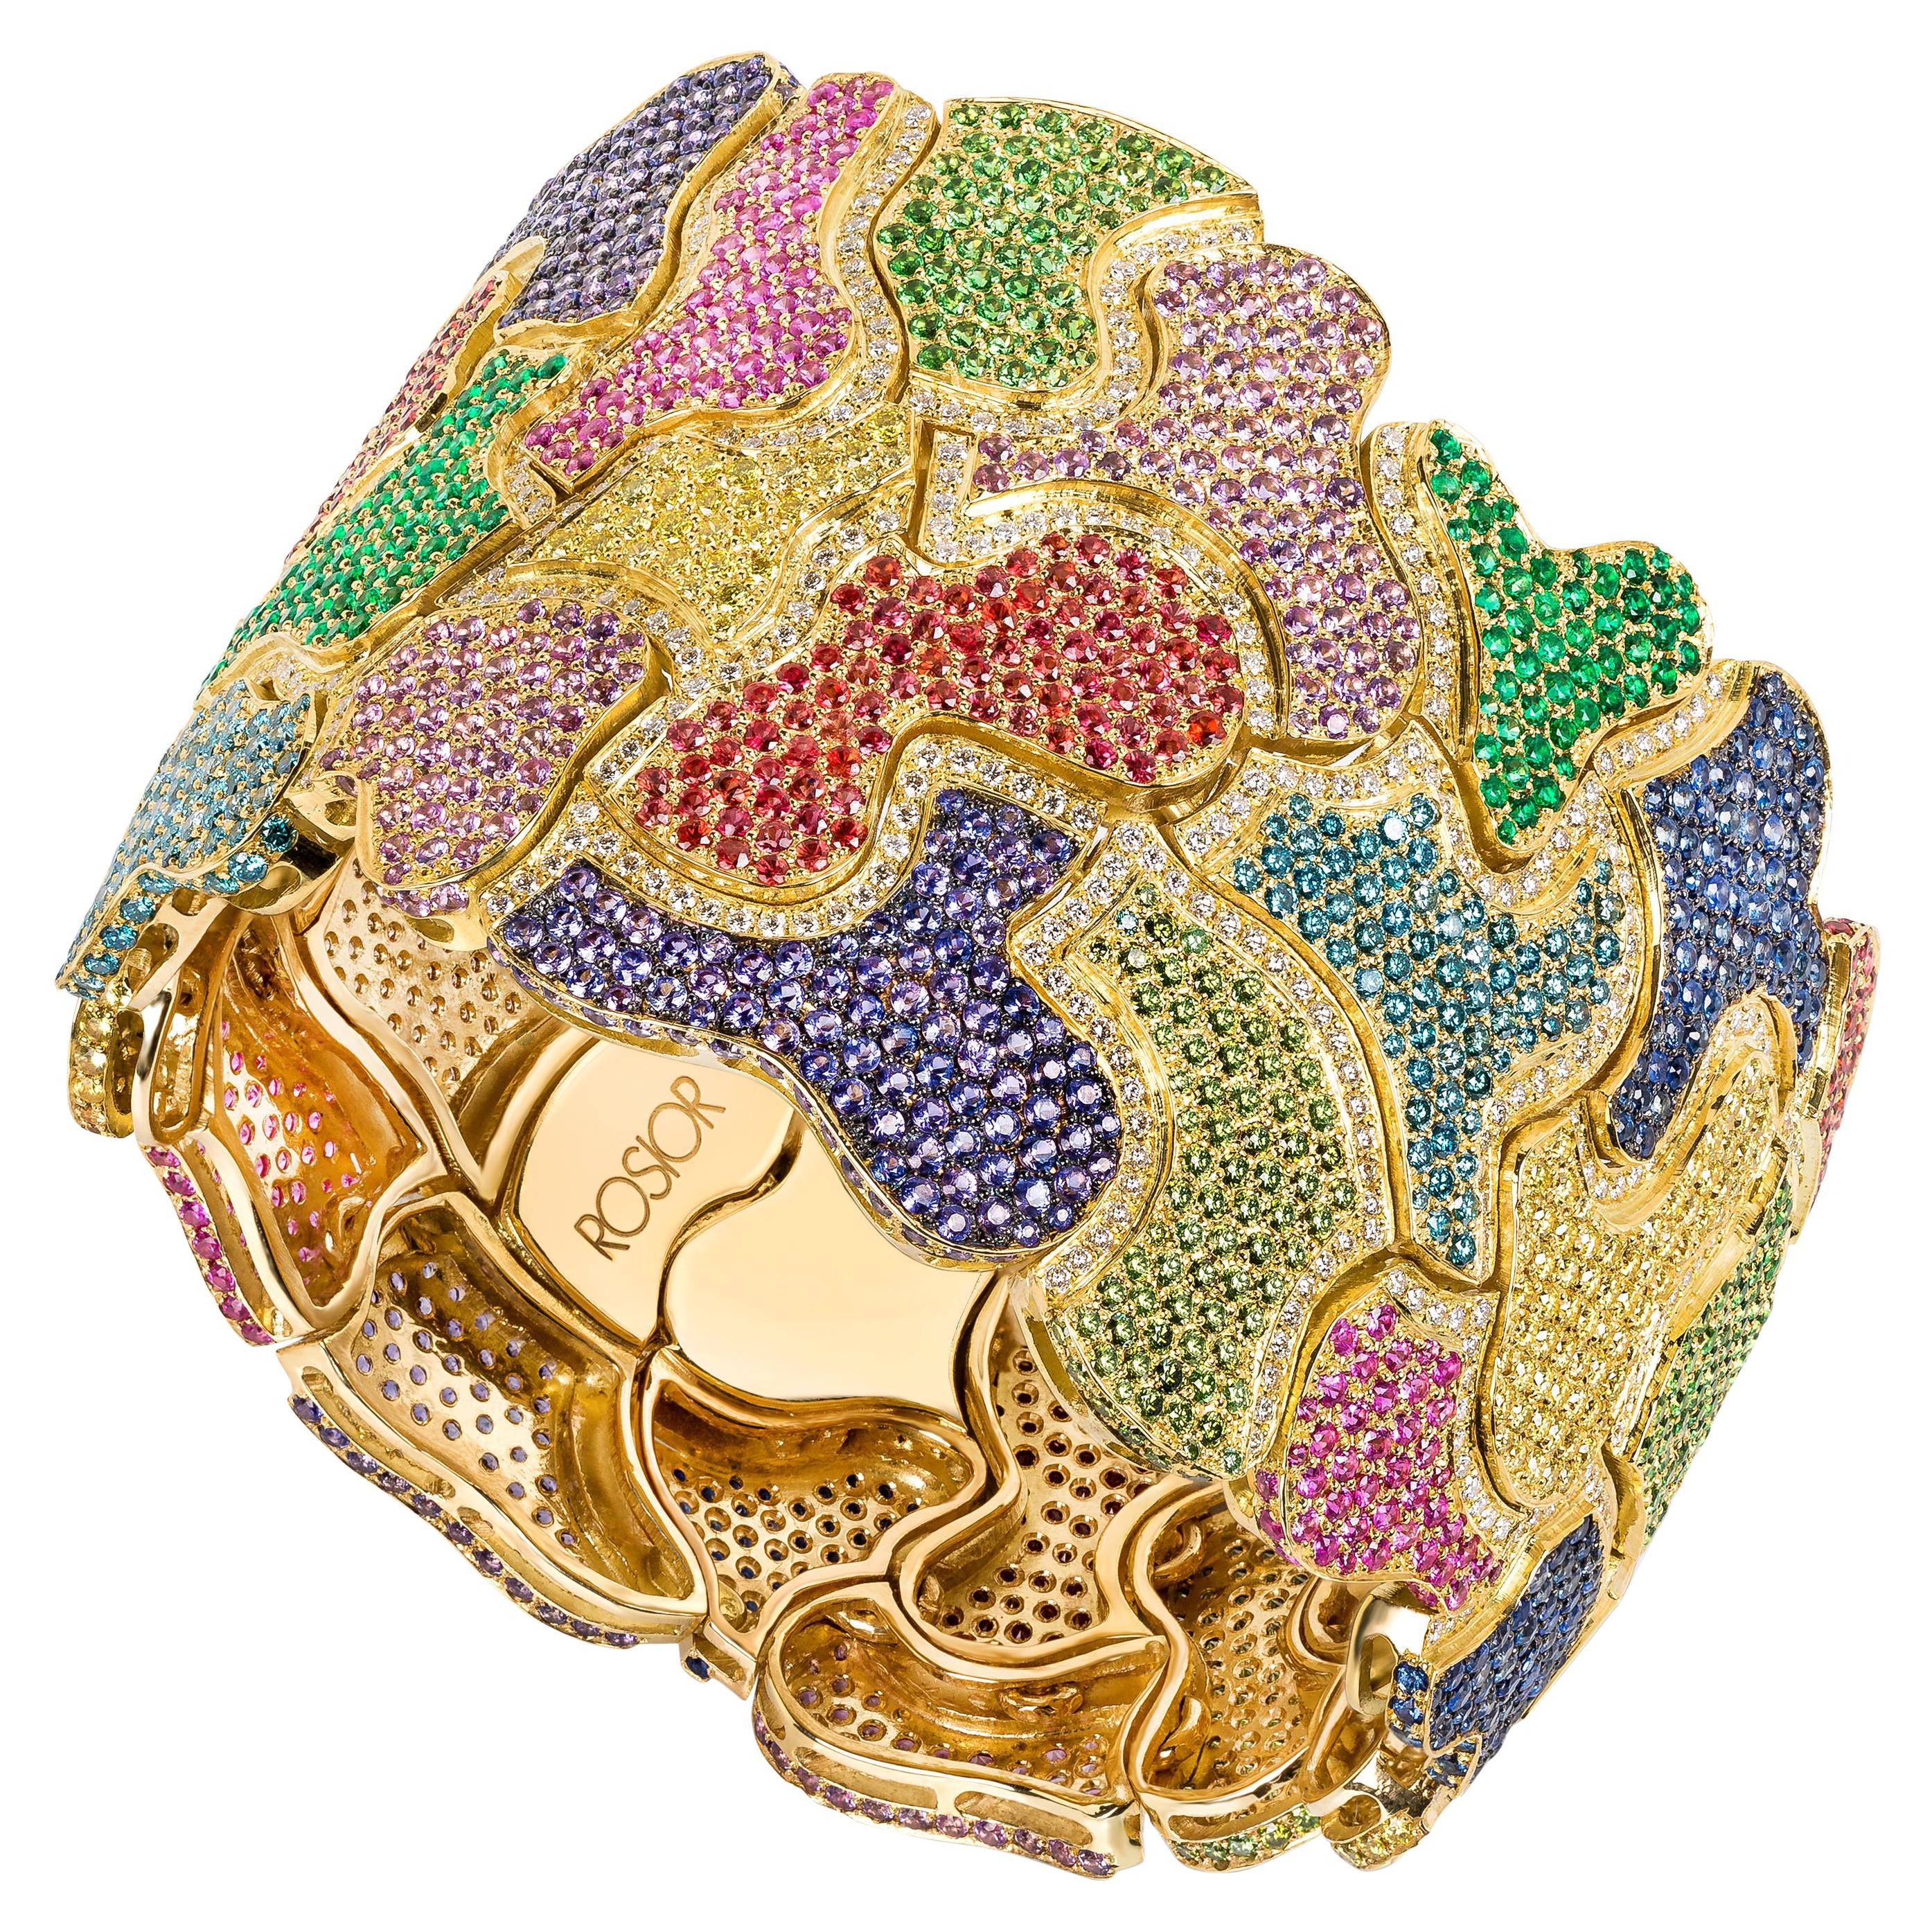 Rosior one-off Multicolor Gemstone Cuff Bracelet set in Yellow Gold